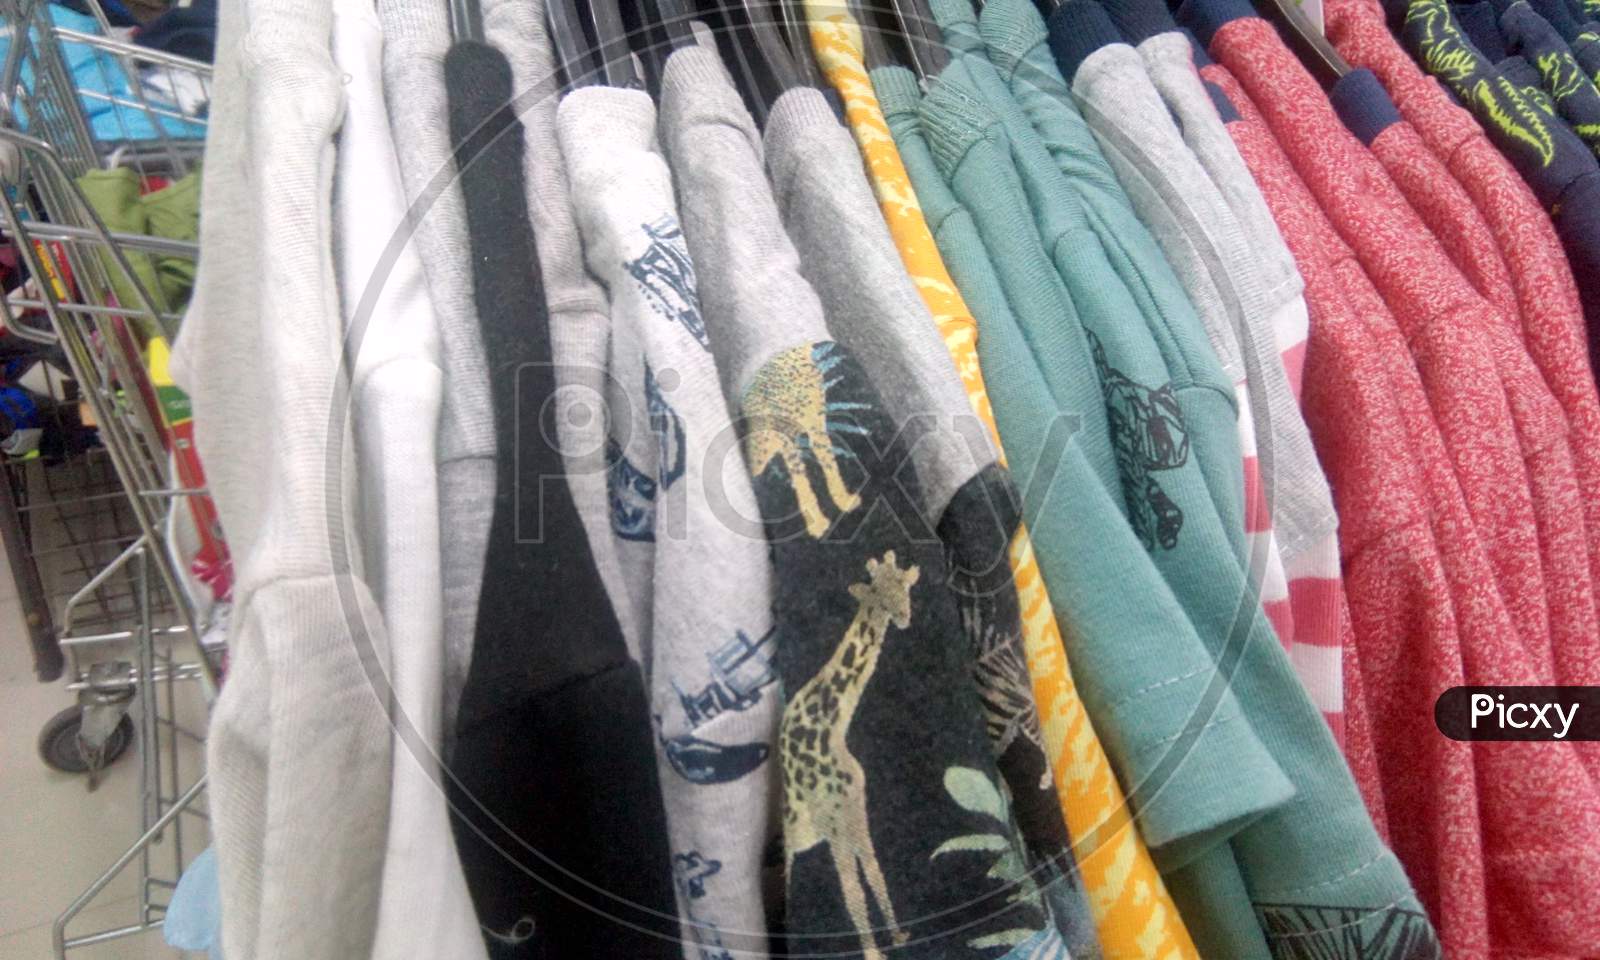 Clothes With Fabric texture In a Closet Of a Store Closeup